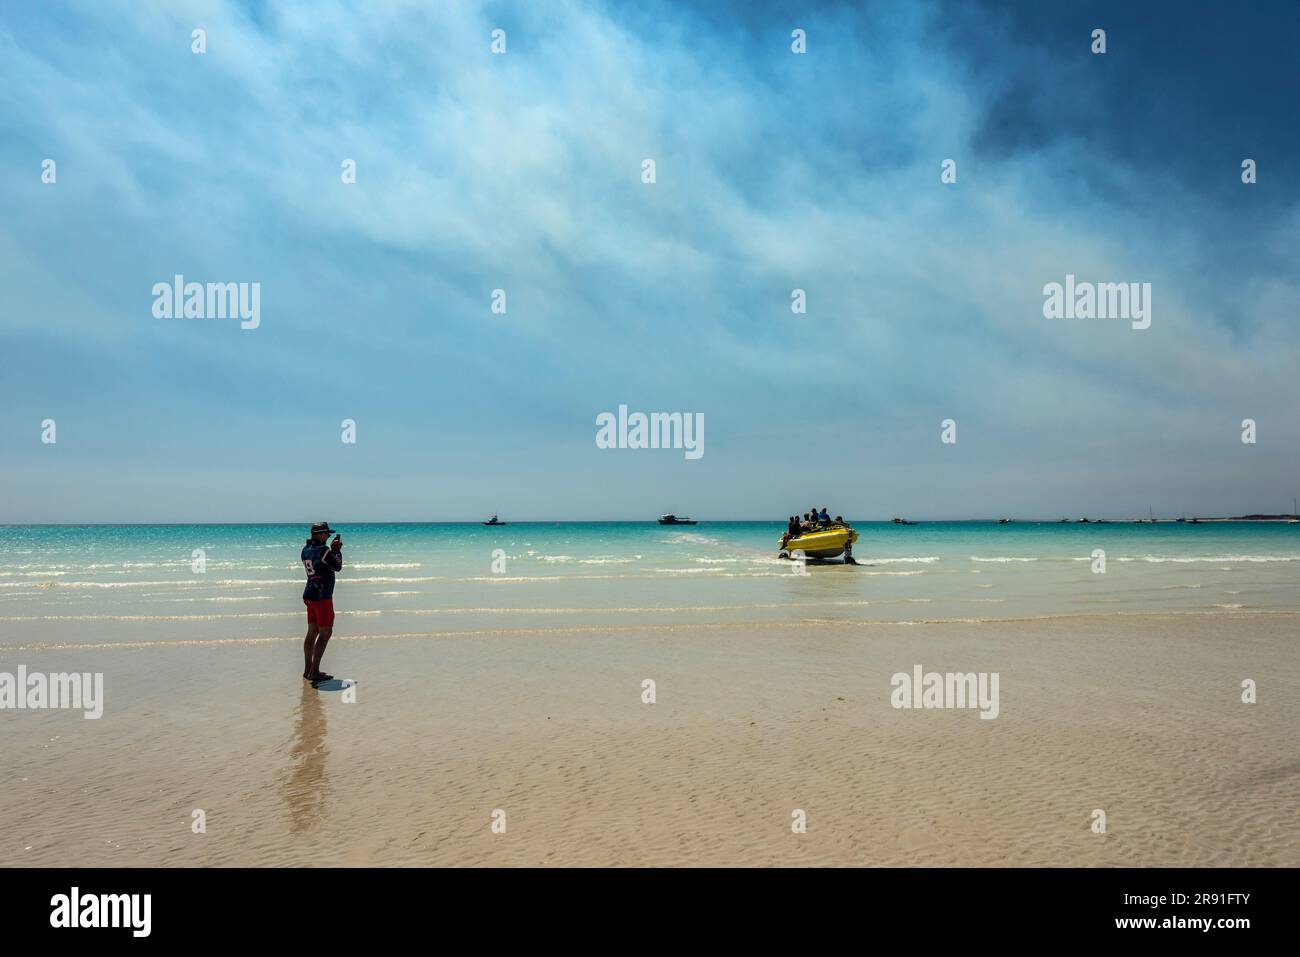 A person takes a photo of a boat on wheels emerging from the water on Cable Beach in Broome Western Australia Stock Photo